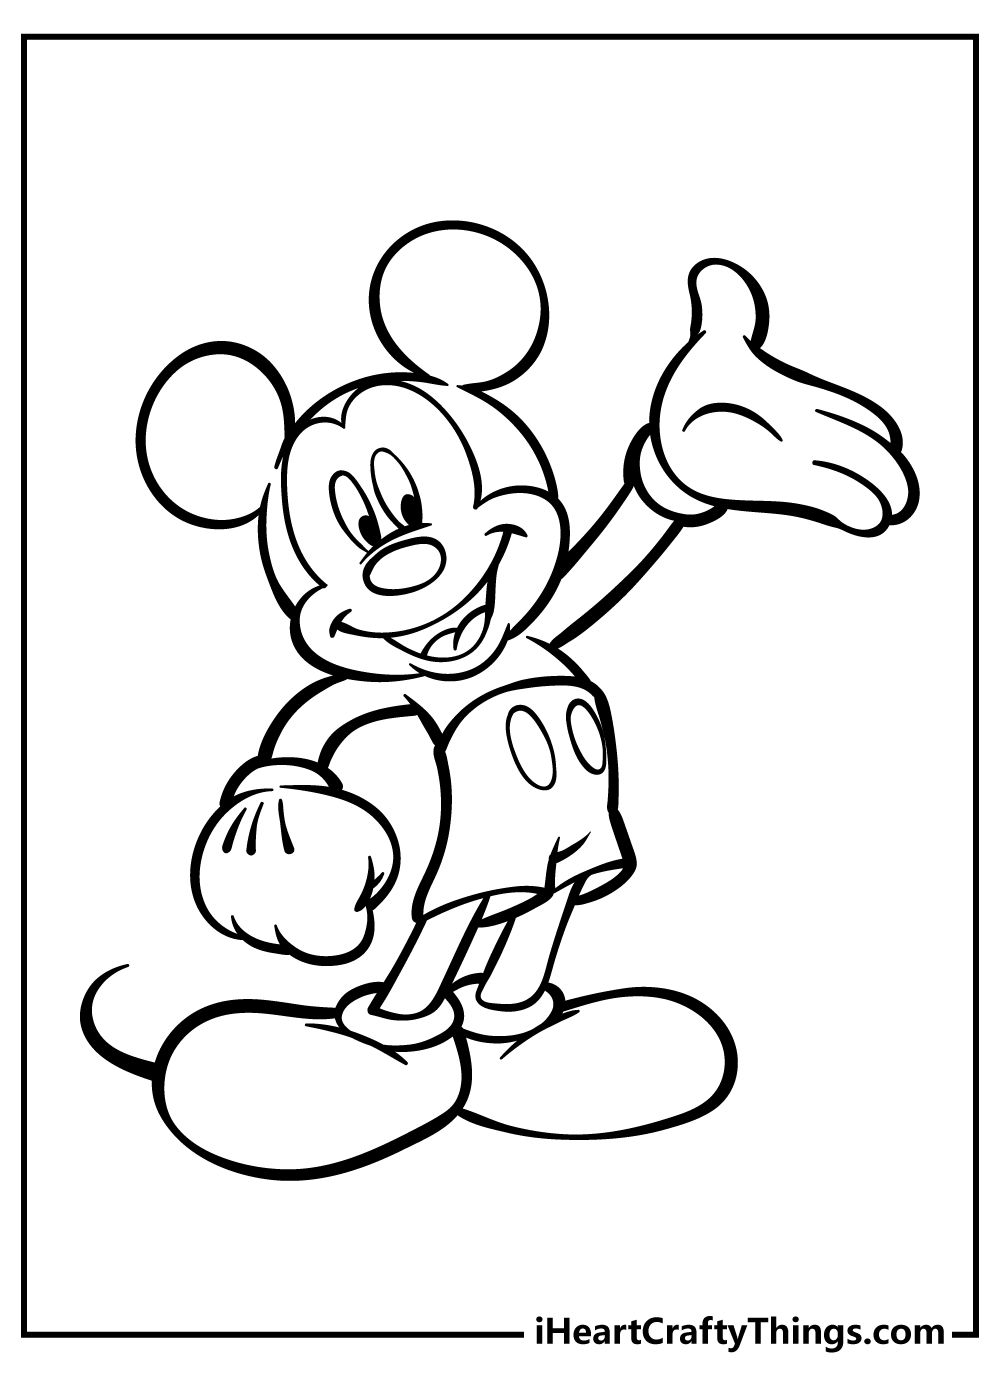 Mickey Mouse Coloring Pages for adults free printable